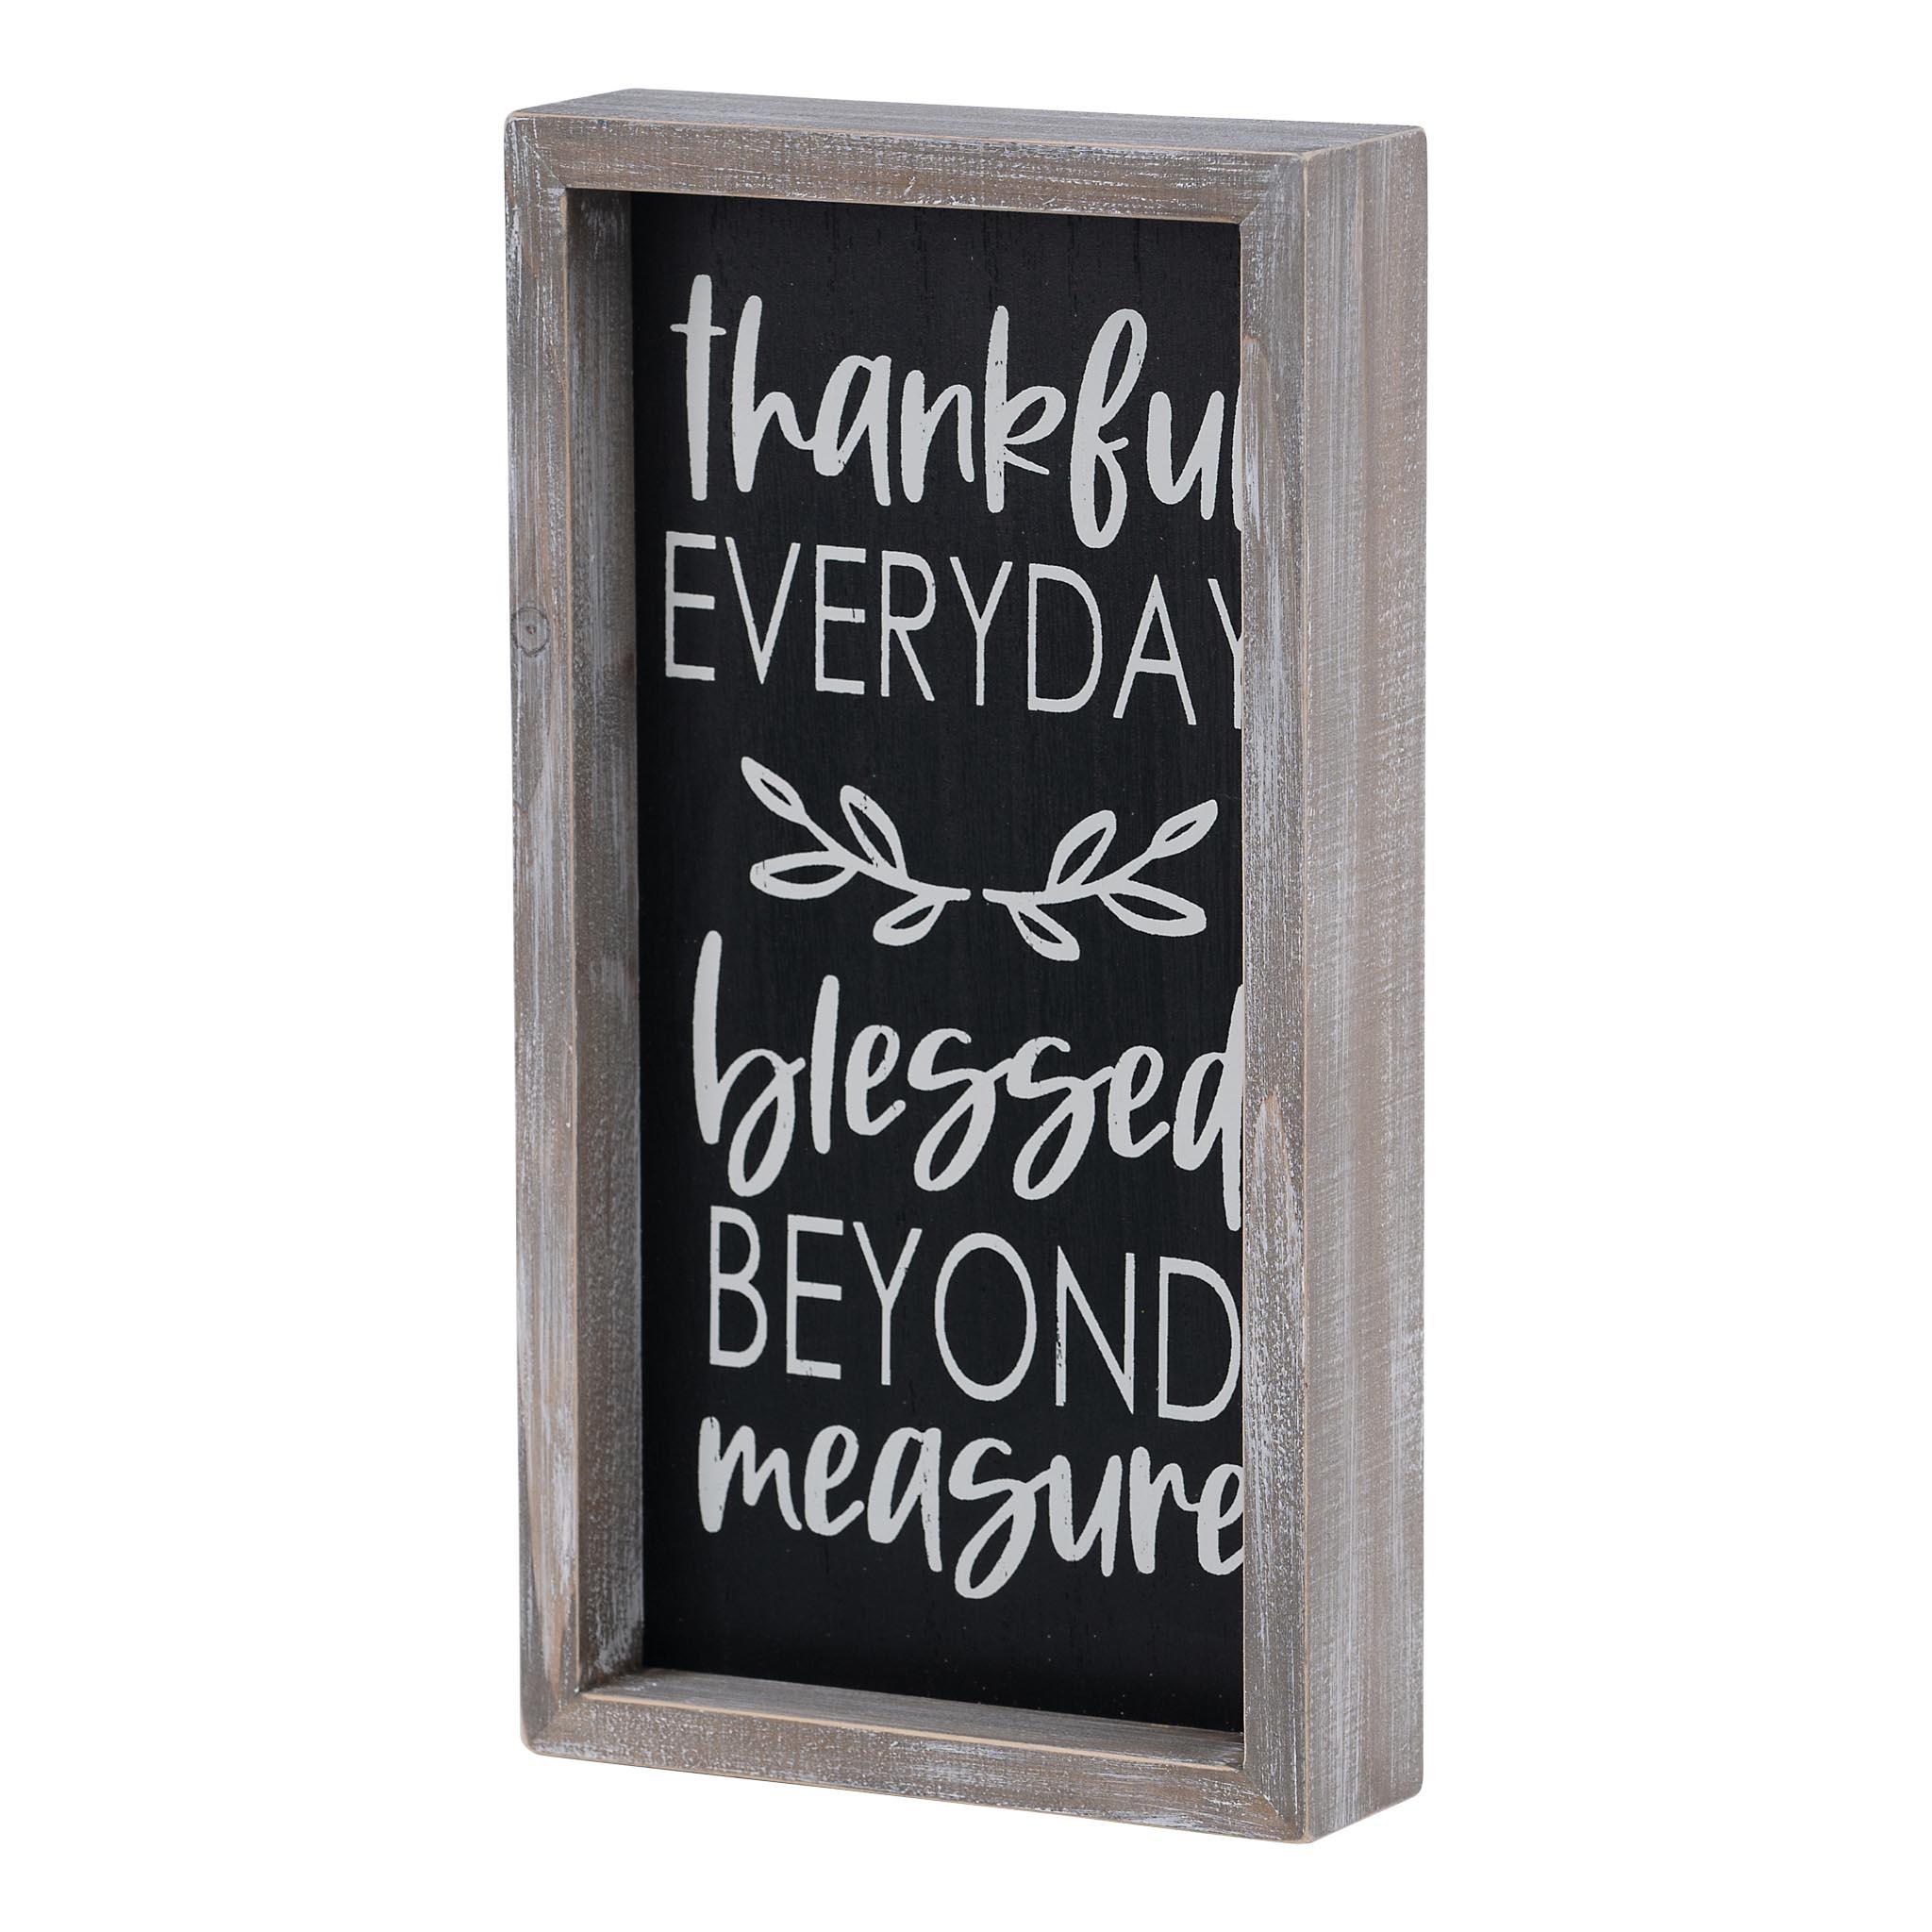 Check Out Our Thankful Everyday - Blessed Beyond Measure Framed Board –  GLORY HAUS